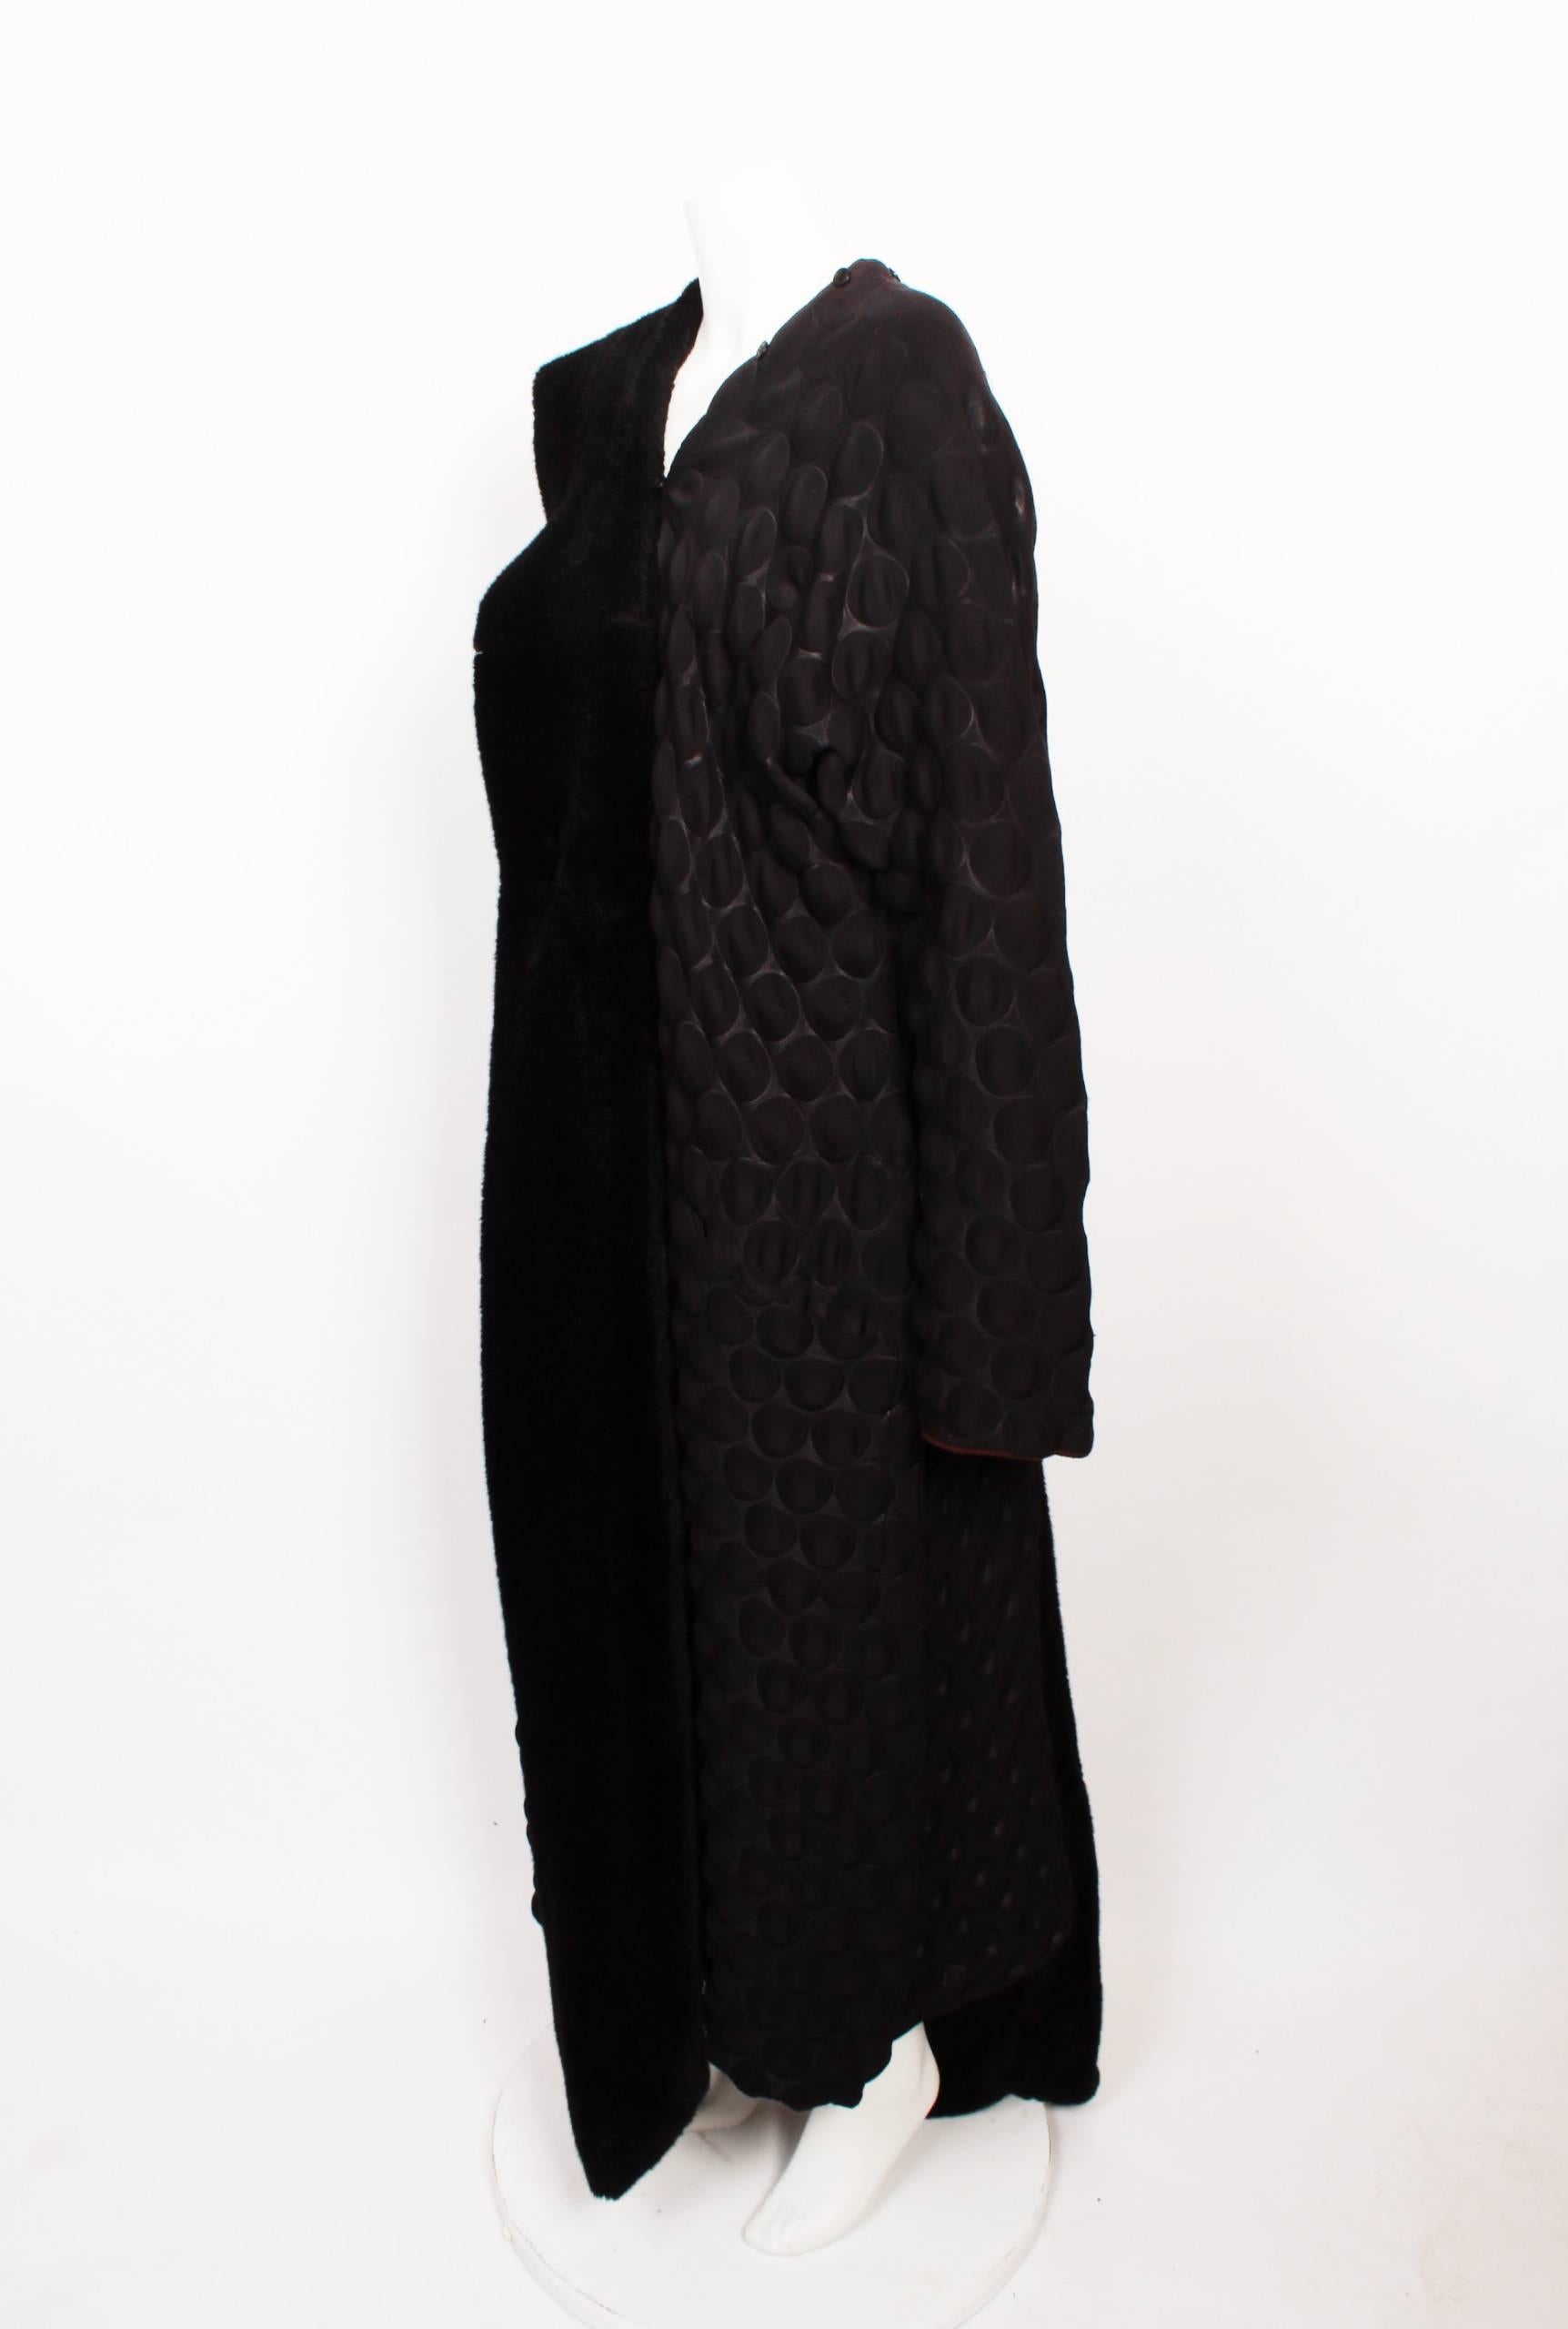 FINAL SALE

Rare Runway Egg crate 3-D embossed Issey Miyake Main line COAT with detachable fur trim. Museum quality from early 2000s. The coat is Black with a black fur trim with a chocolate brown trim and matching lining. 
Designed for the  Fall /